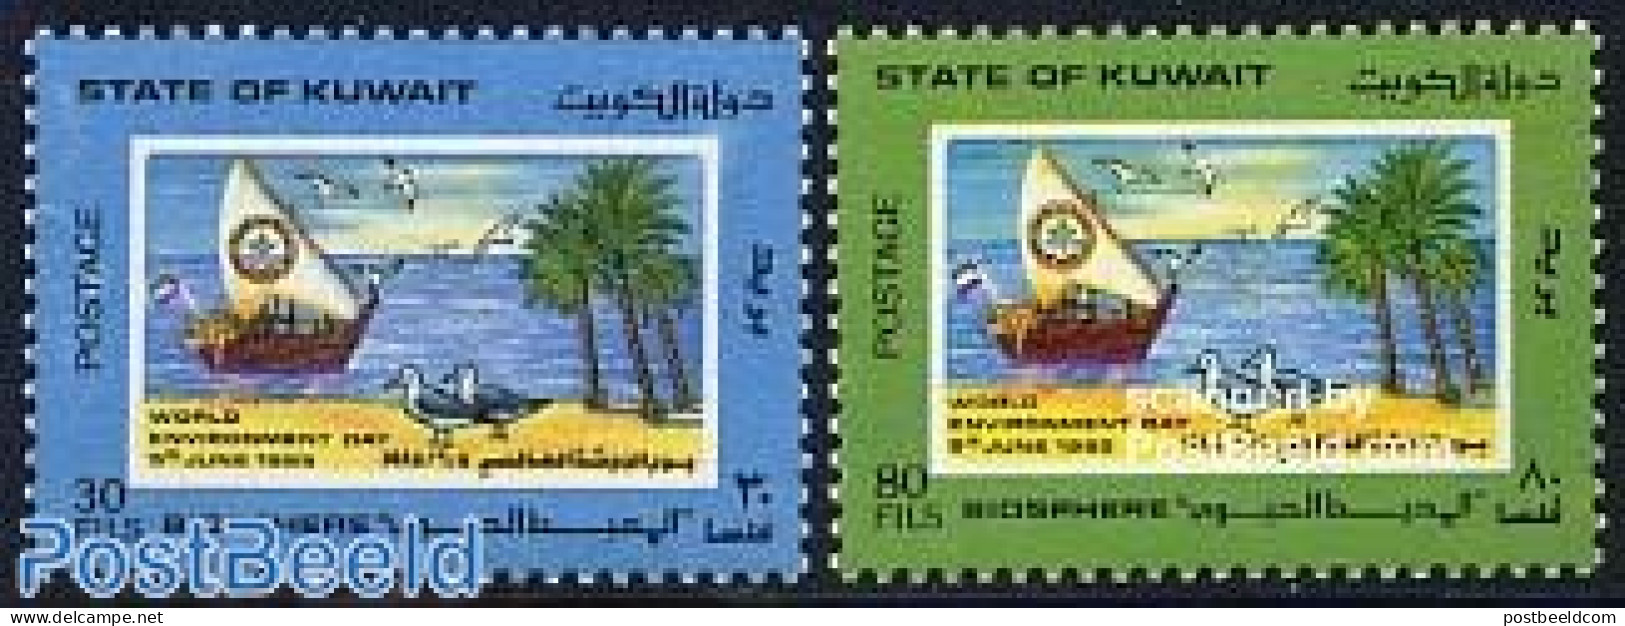 Kuwait 1985 Environment Day 2v, Mint NH, Nature - Transport - Birds - Environment - Trees & Forests - Ships And Boats - Environment & Climate Protection